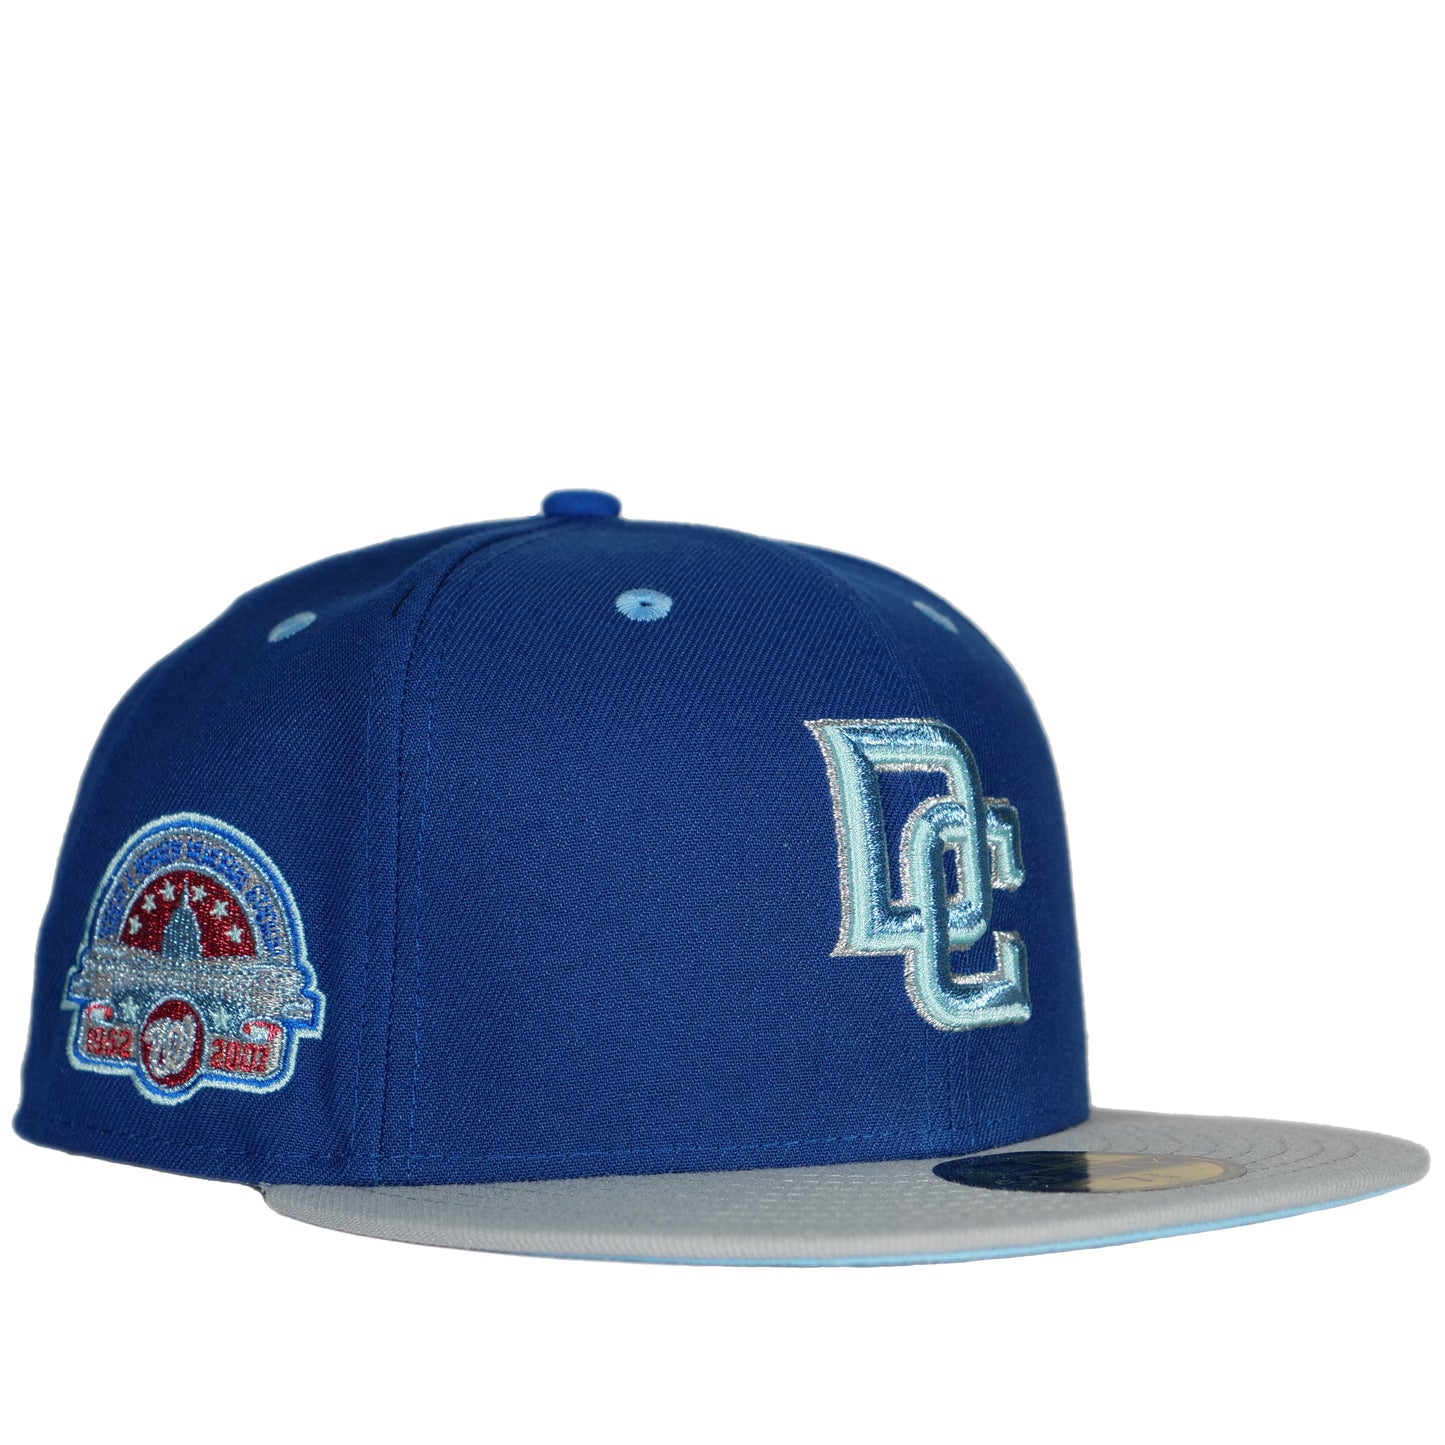 New Era Washington Nationals 59Fifty Fitted Hat - Navy Blue/ Grey/ Light Blue